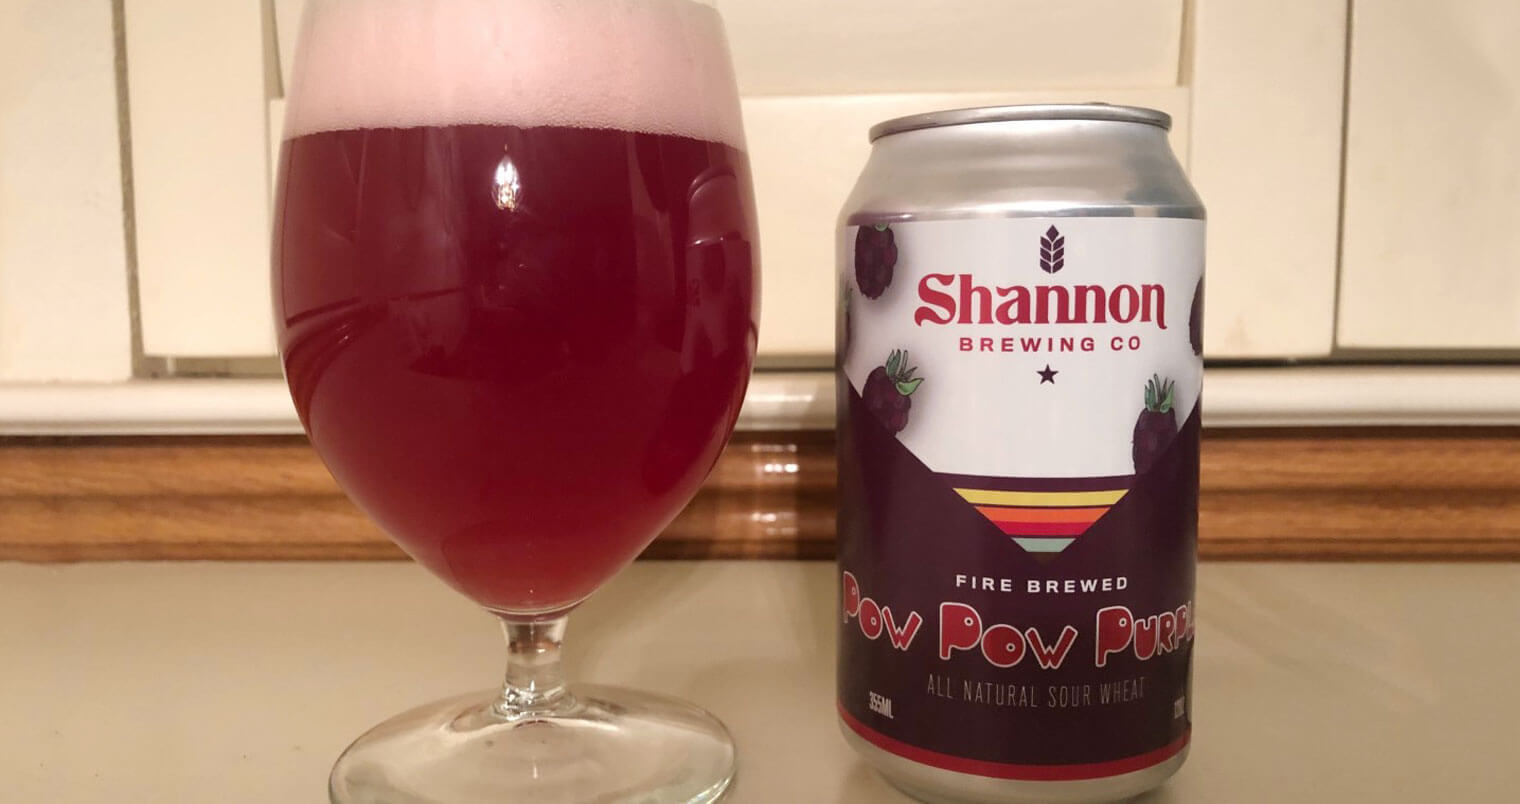 Shannon Brewing Company Pow Pow Purple, new brew review 2019, featured image